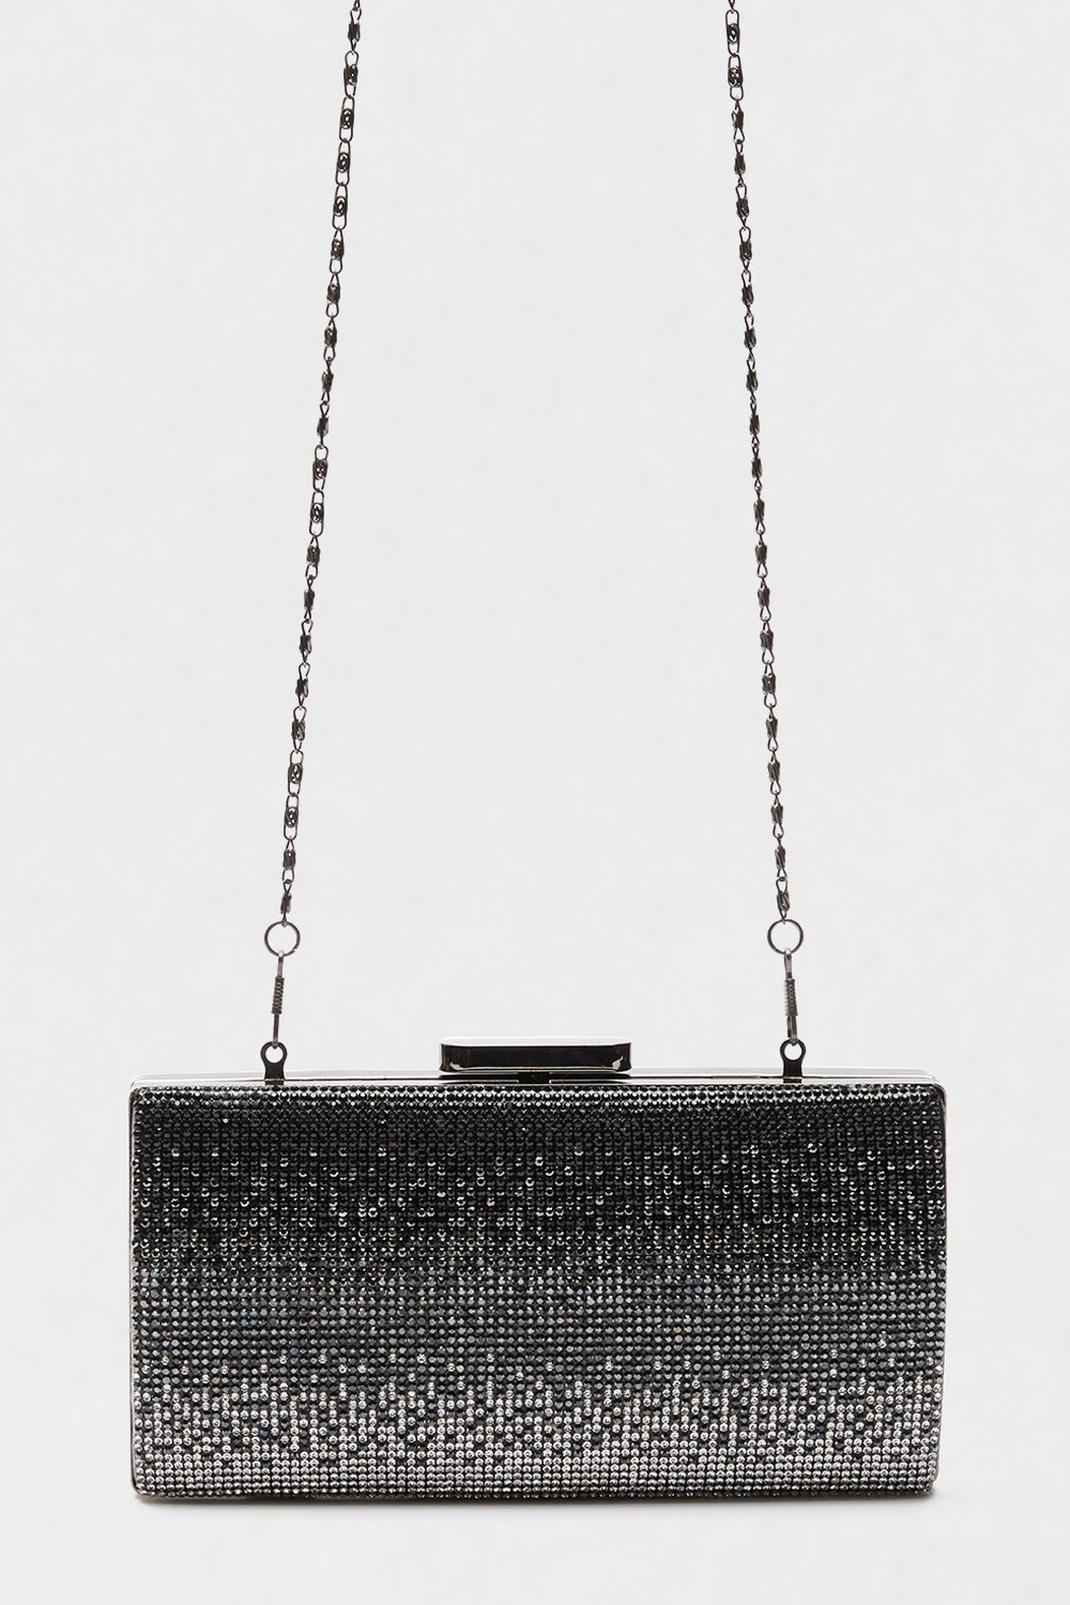 105 Black Ombre Diamante Structured Box Clutch  image number 2